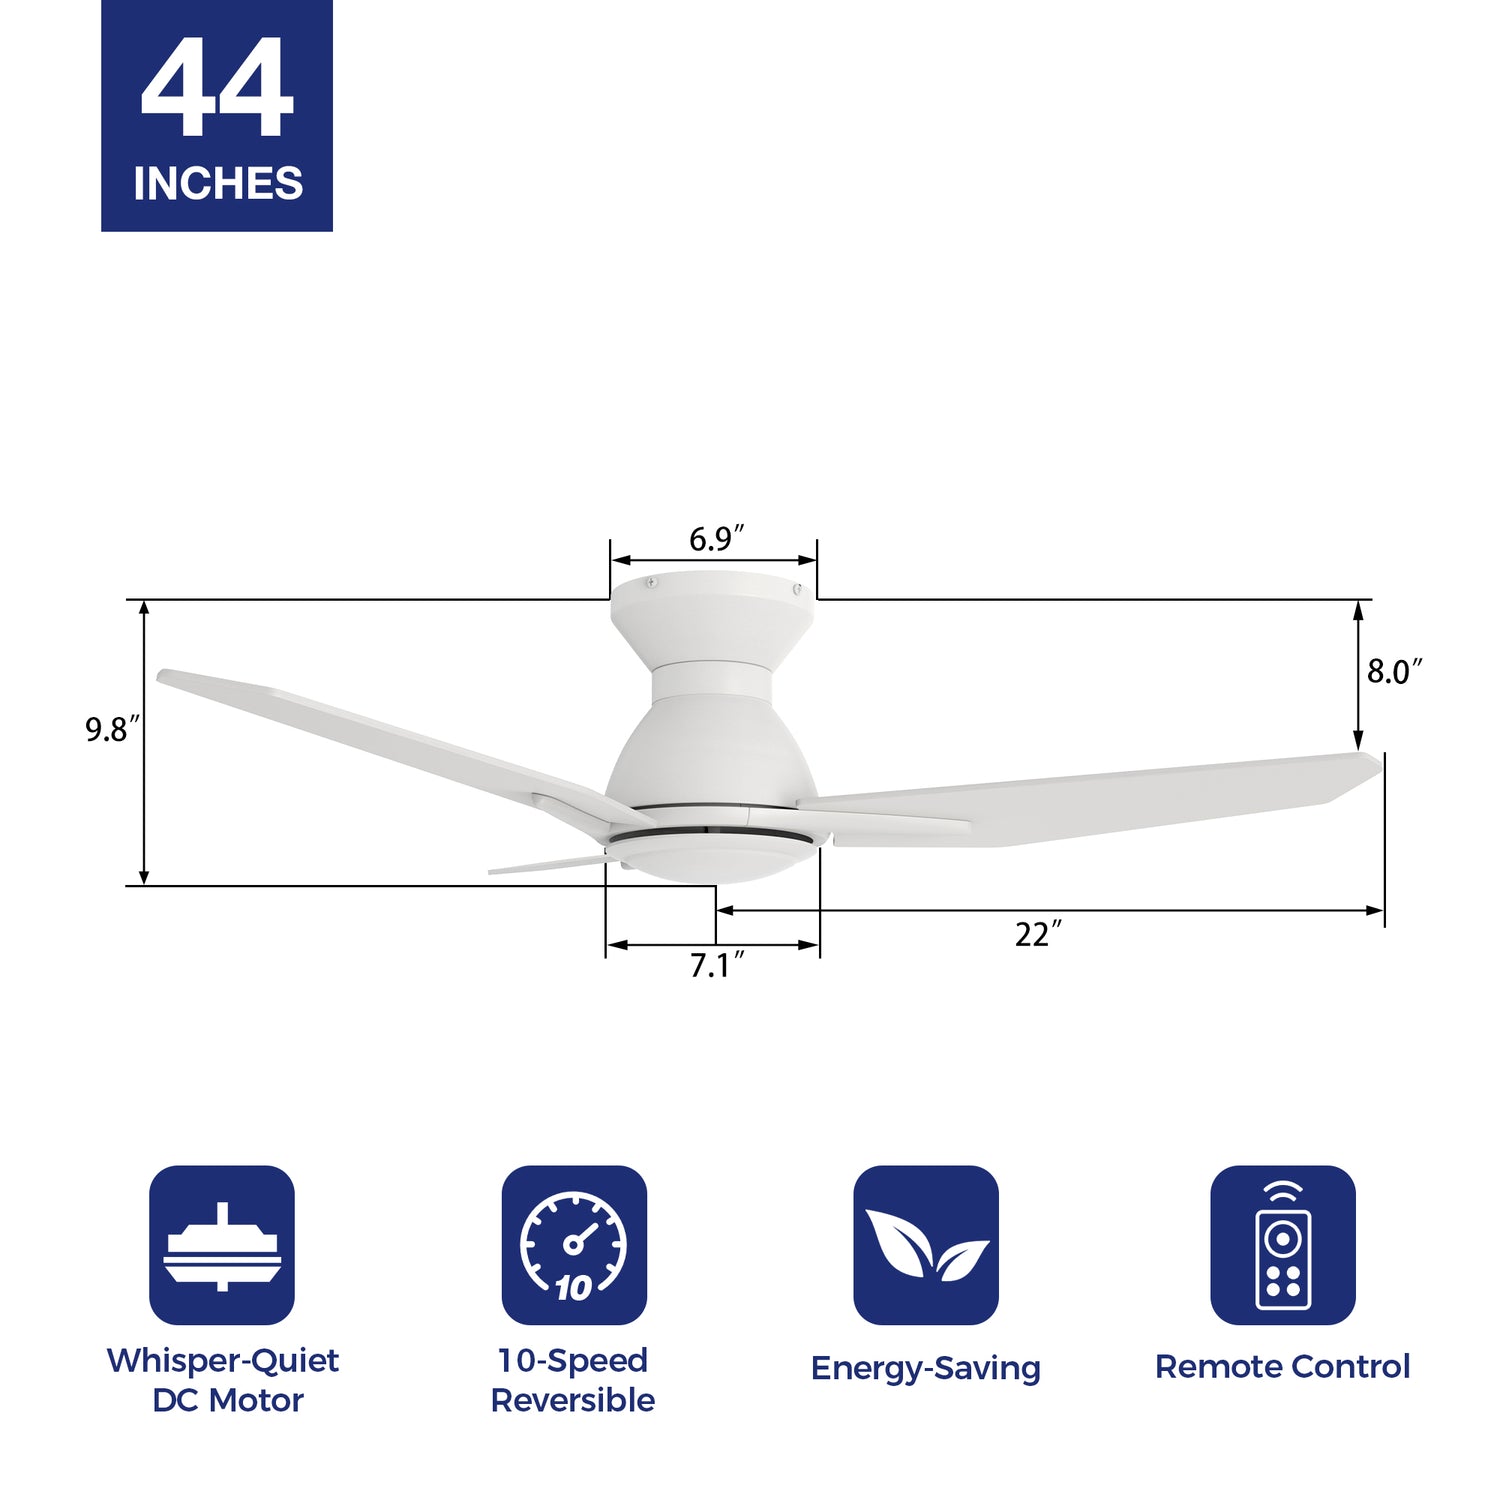 Indoor ceiling fan without lights 44 inch, featuring with whisper-quiet dc motor, reversible 10-speed setting, and remote control. 2830 CFM airflow output, providing you with a cool summer breeze. 